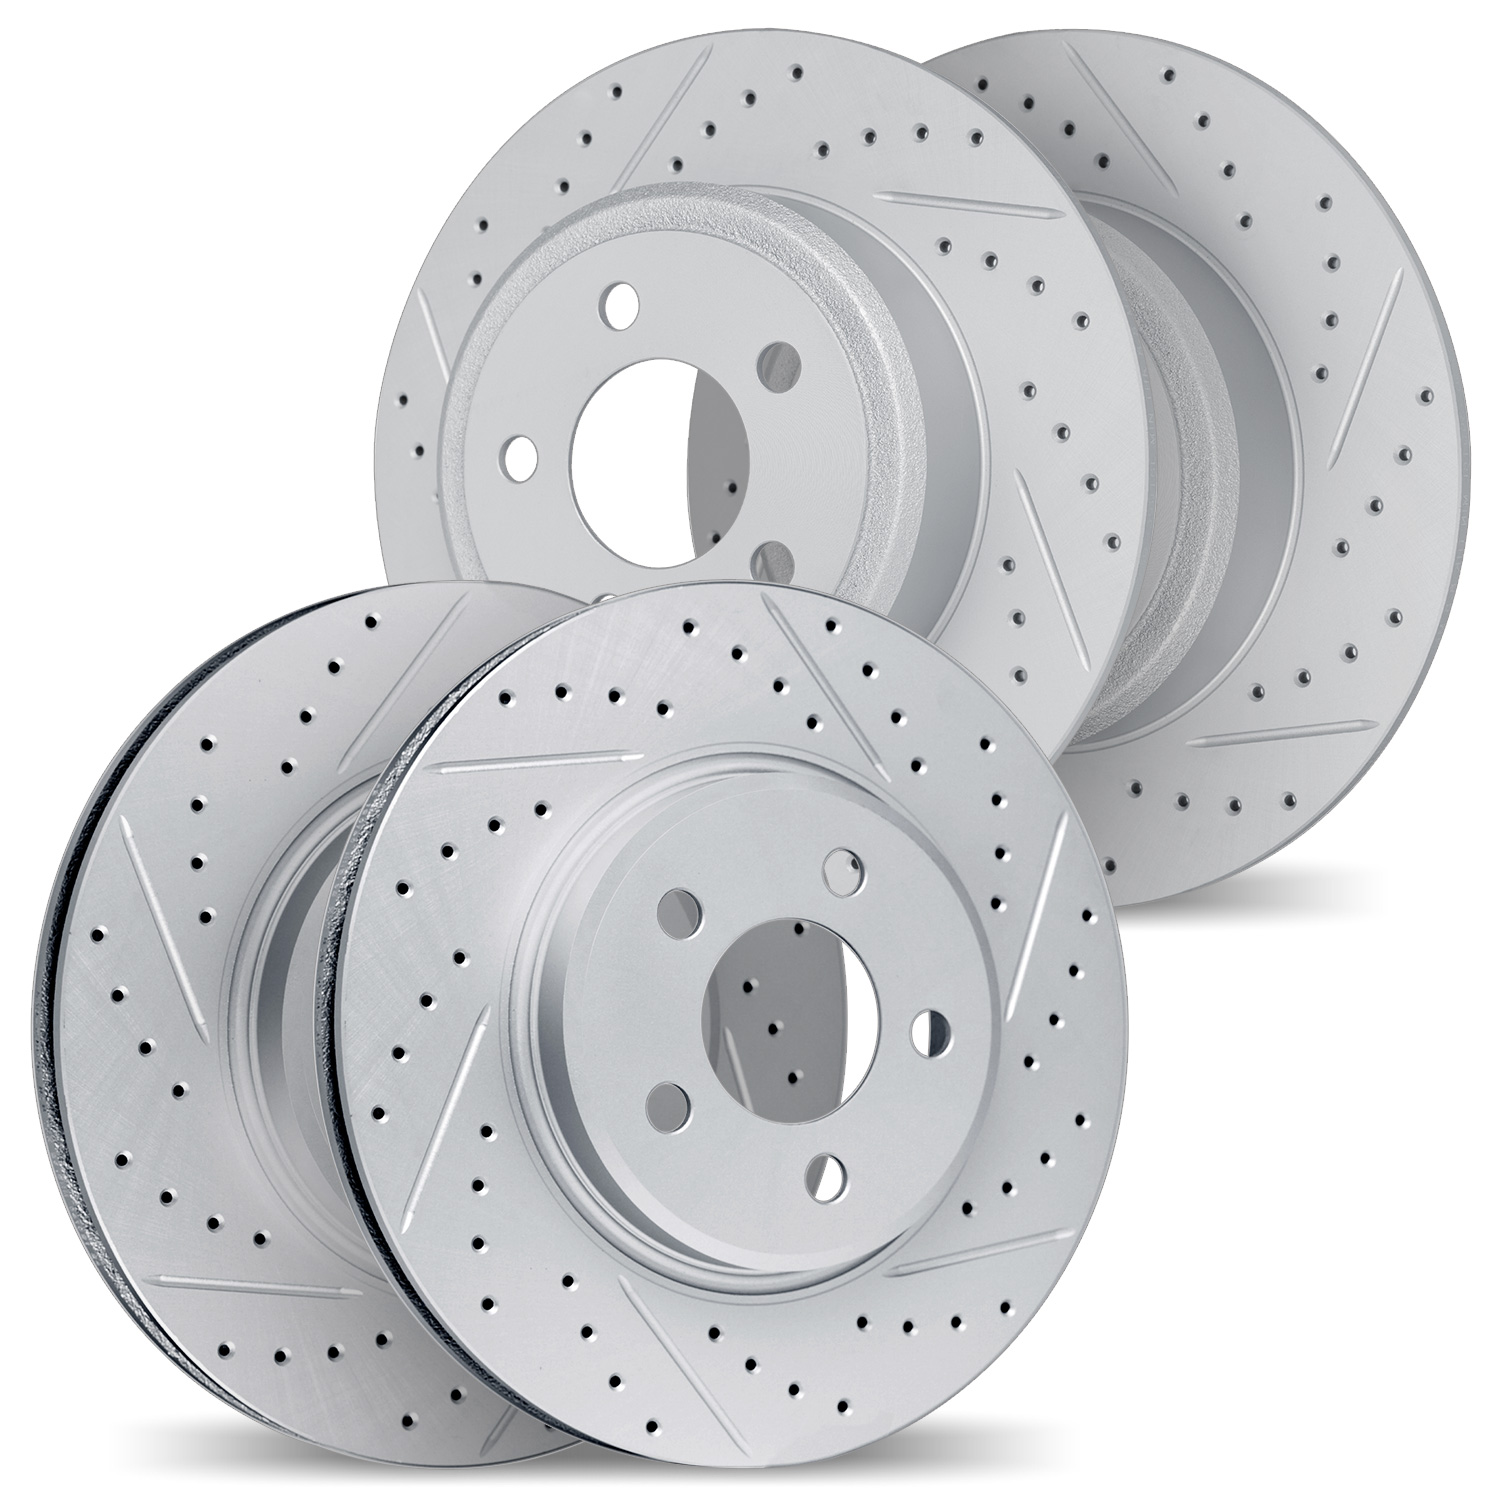 2004-76068 Geoperformance Drilled/Slotted Brake Rotors, 2004-2010 Lexus/Toyota/Scion, Position: Front and Rear